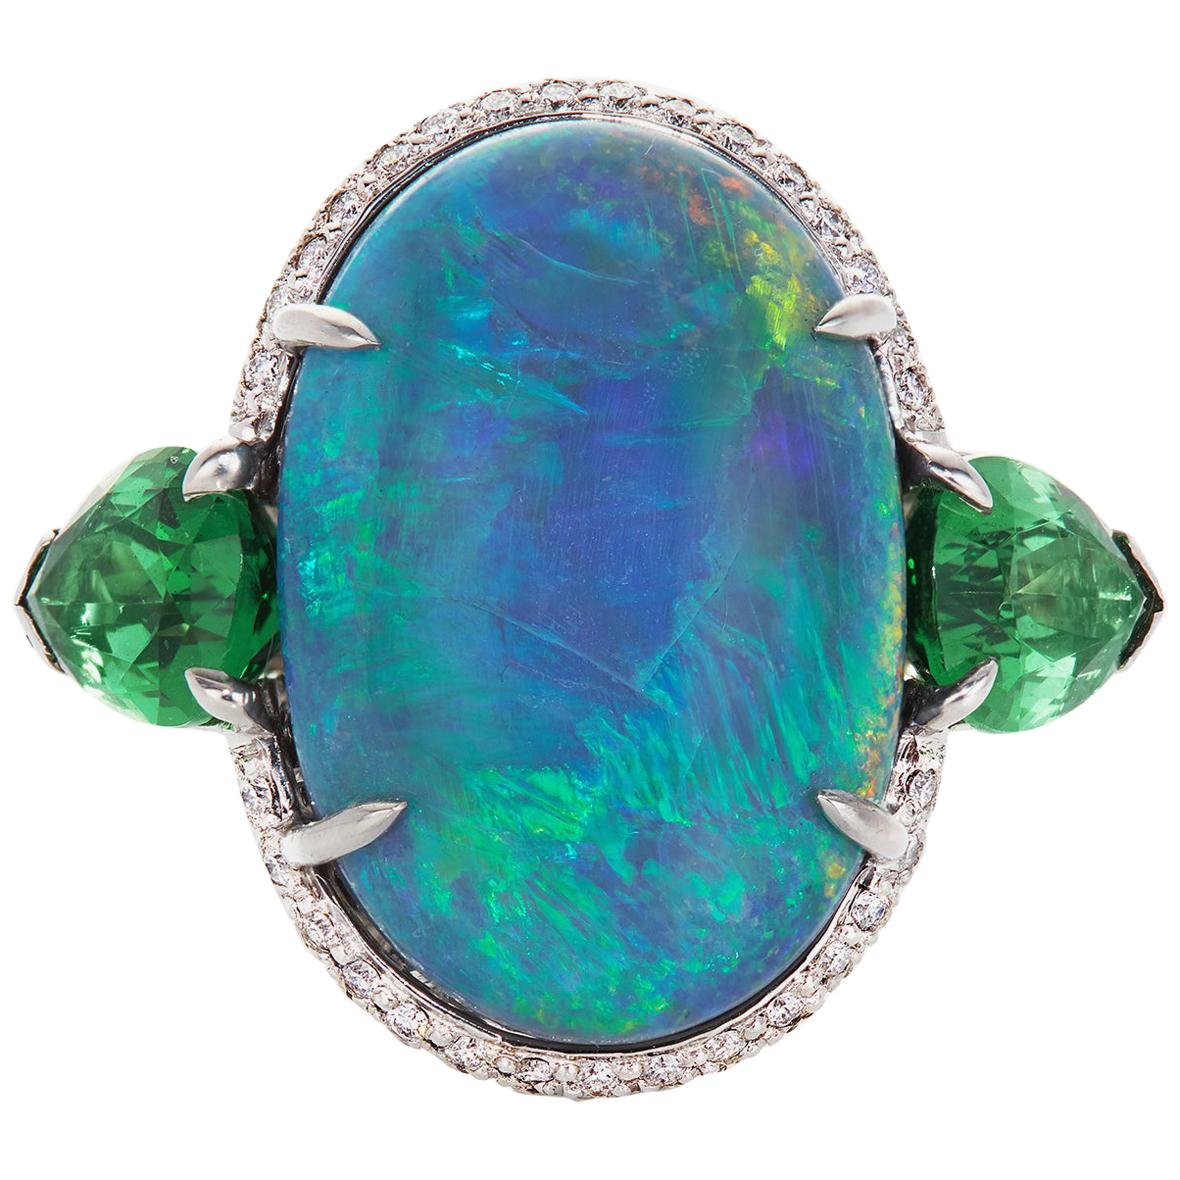 AGL 10.99 Carat Black Opal Ring with 4.36 Cts Tsavorite and Diamond in Platinum